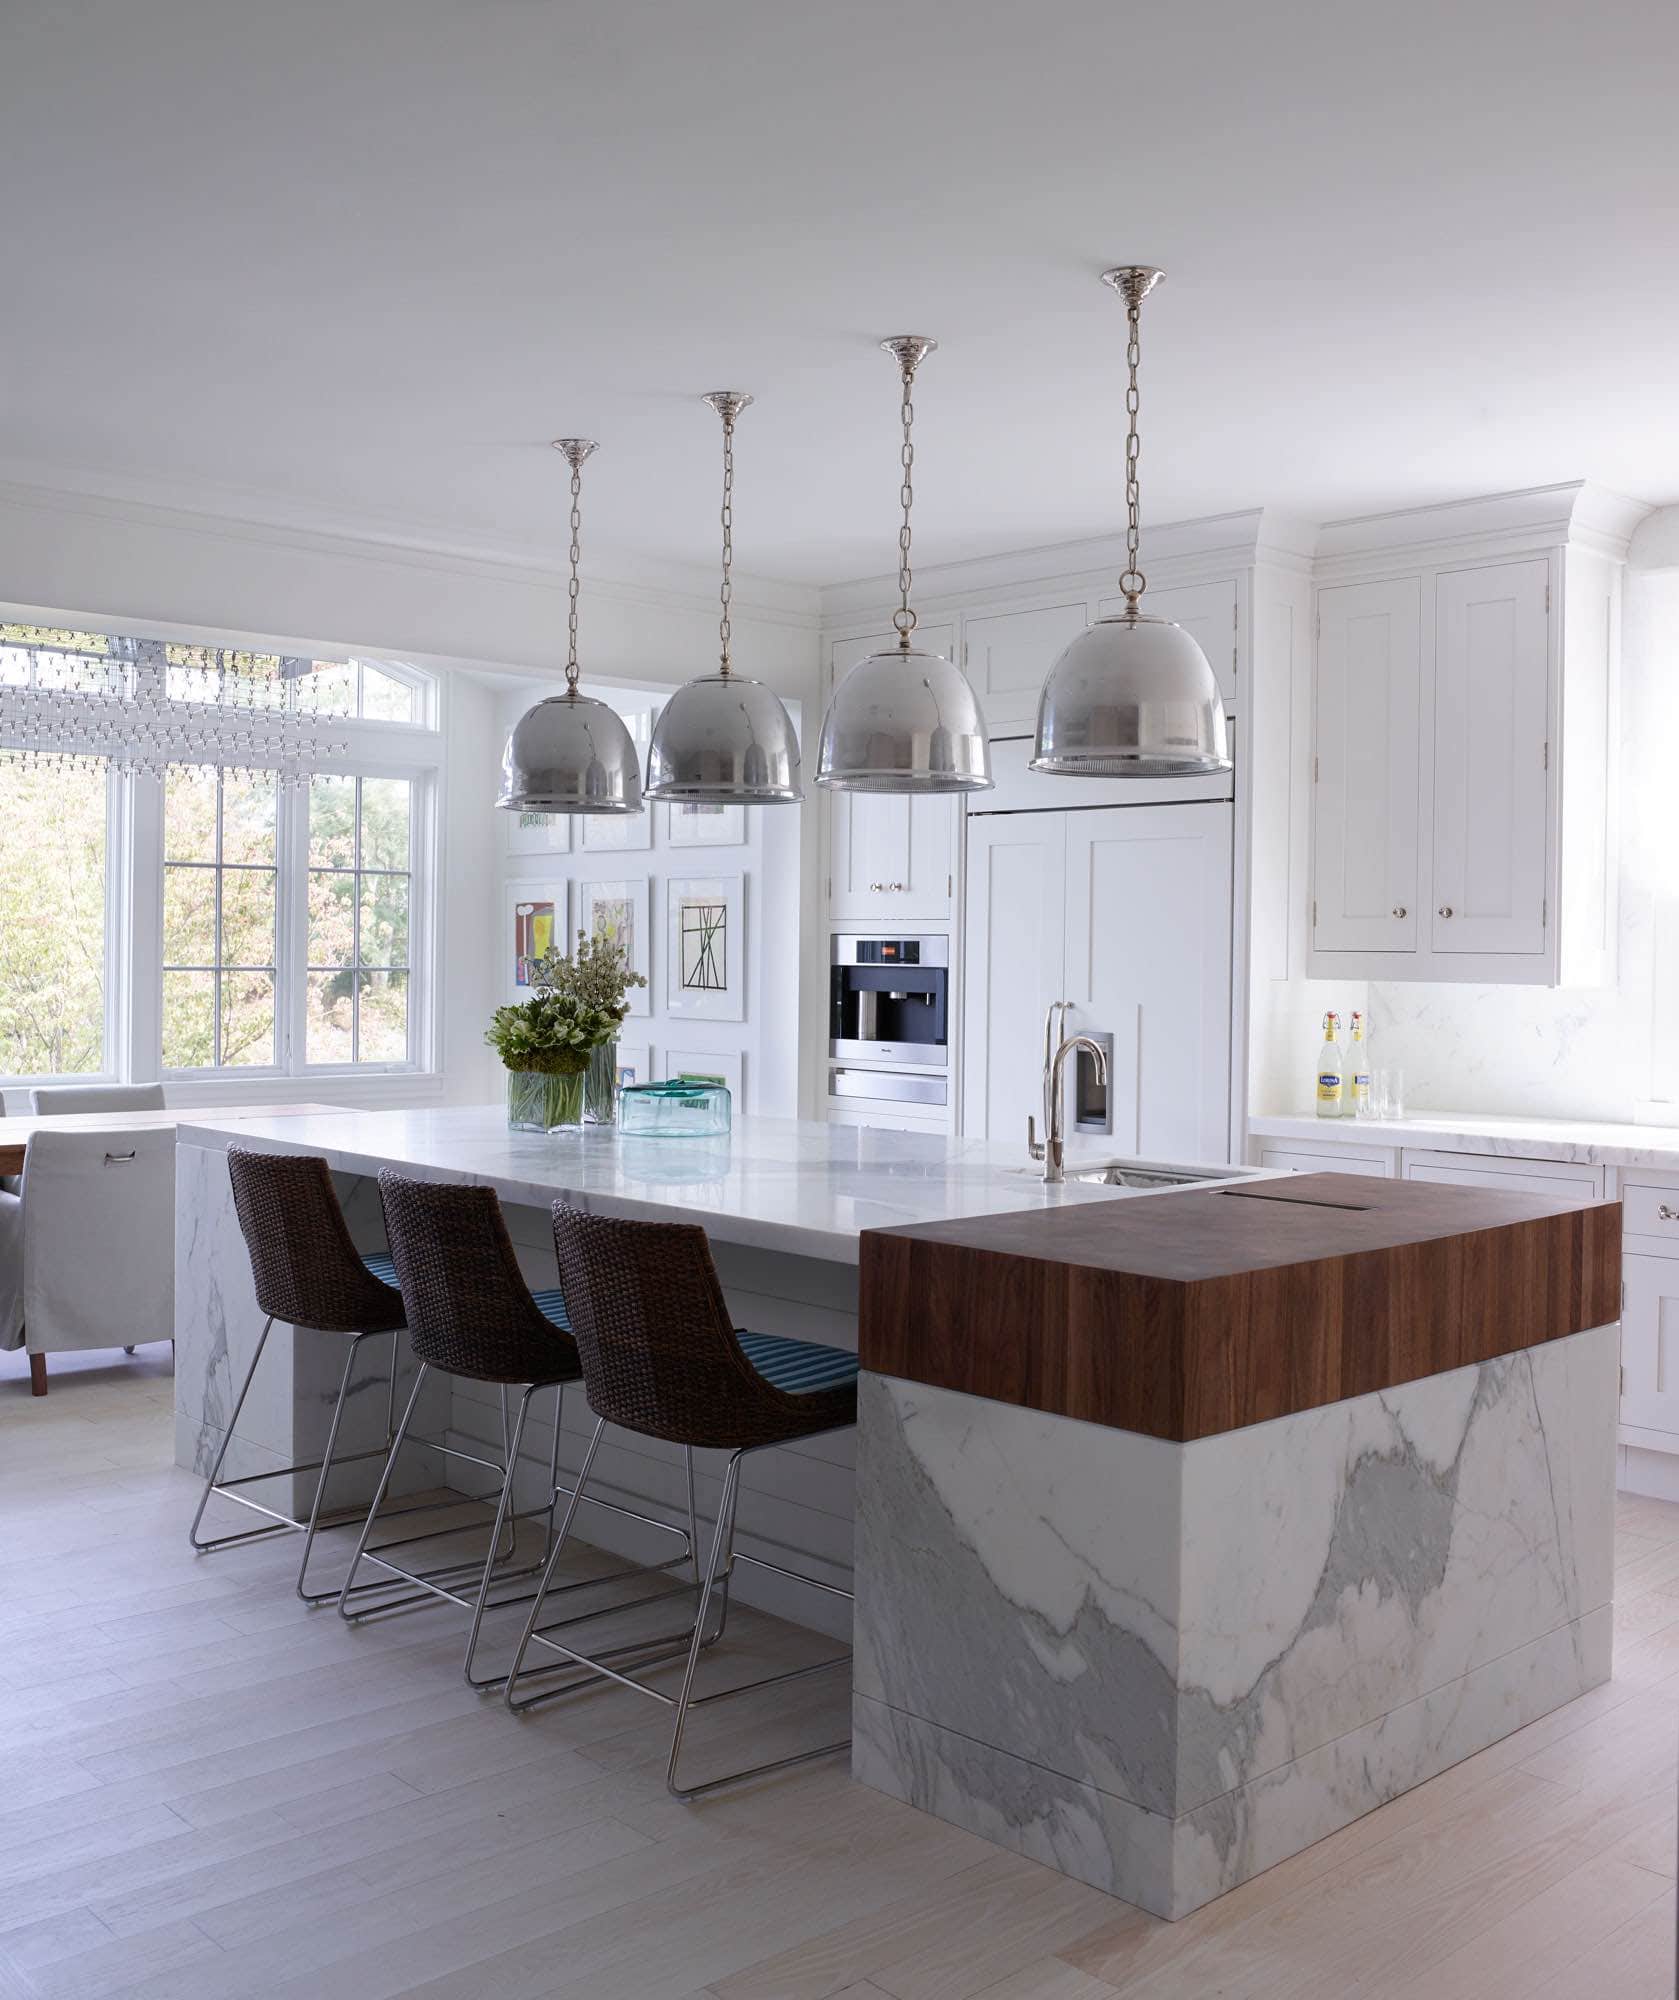 Designed by Carol Egan, the kitchen is shown in this image with "Oskar" hanging lights from Remains Lighting over the large marble and butcher block Island.  The kitchen Cabinets are from Peacock Kitchen.  Window treatment in Tropicale Mauritius linen fabric by Davis & Warshow.